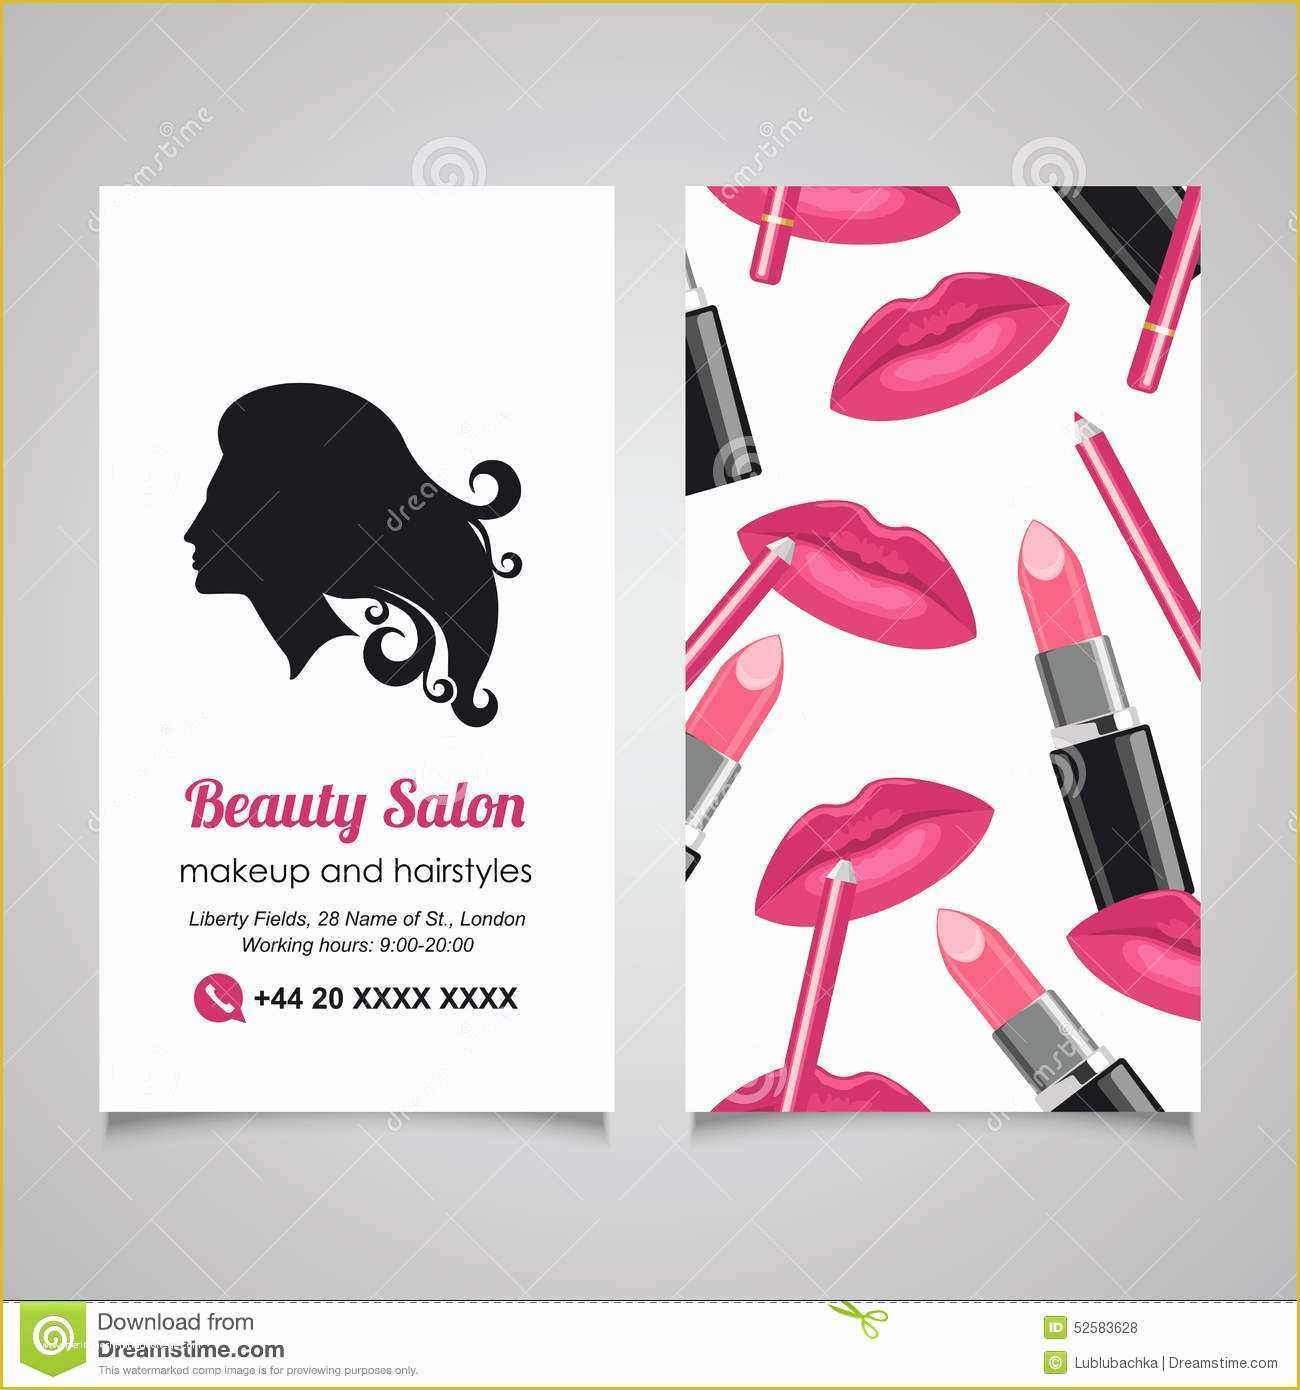 Beauty Business Cards Templates Free Of Makeup Business Cards Templates Free Business Card